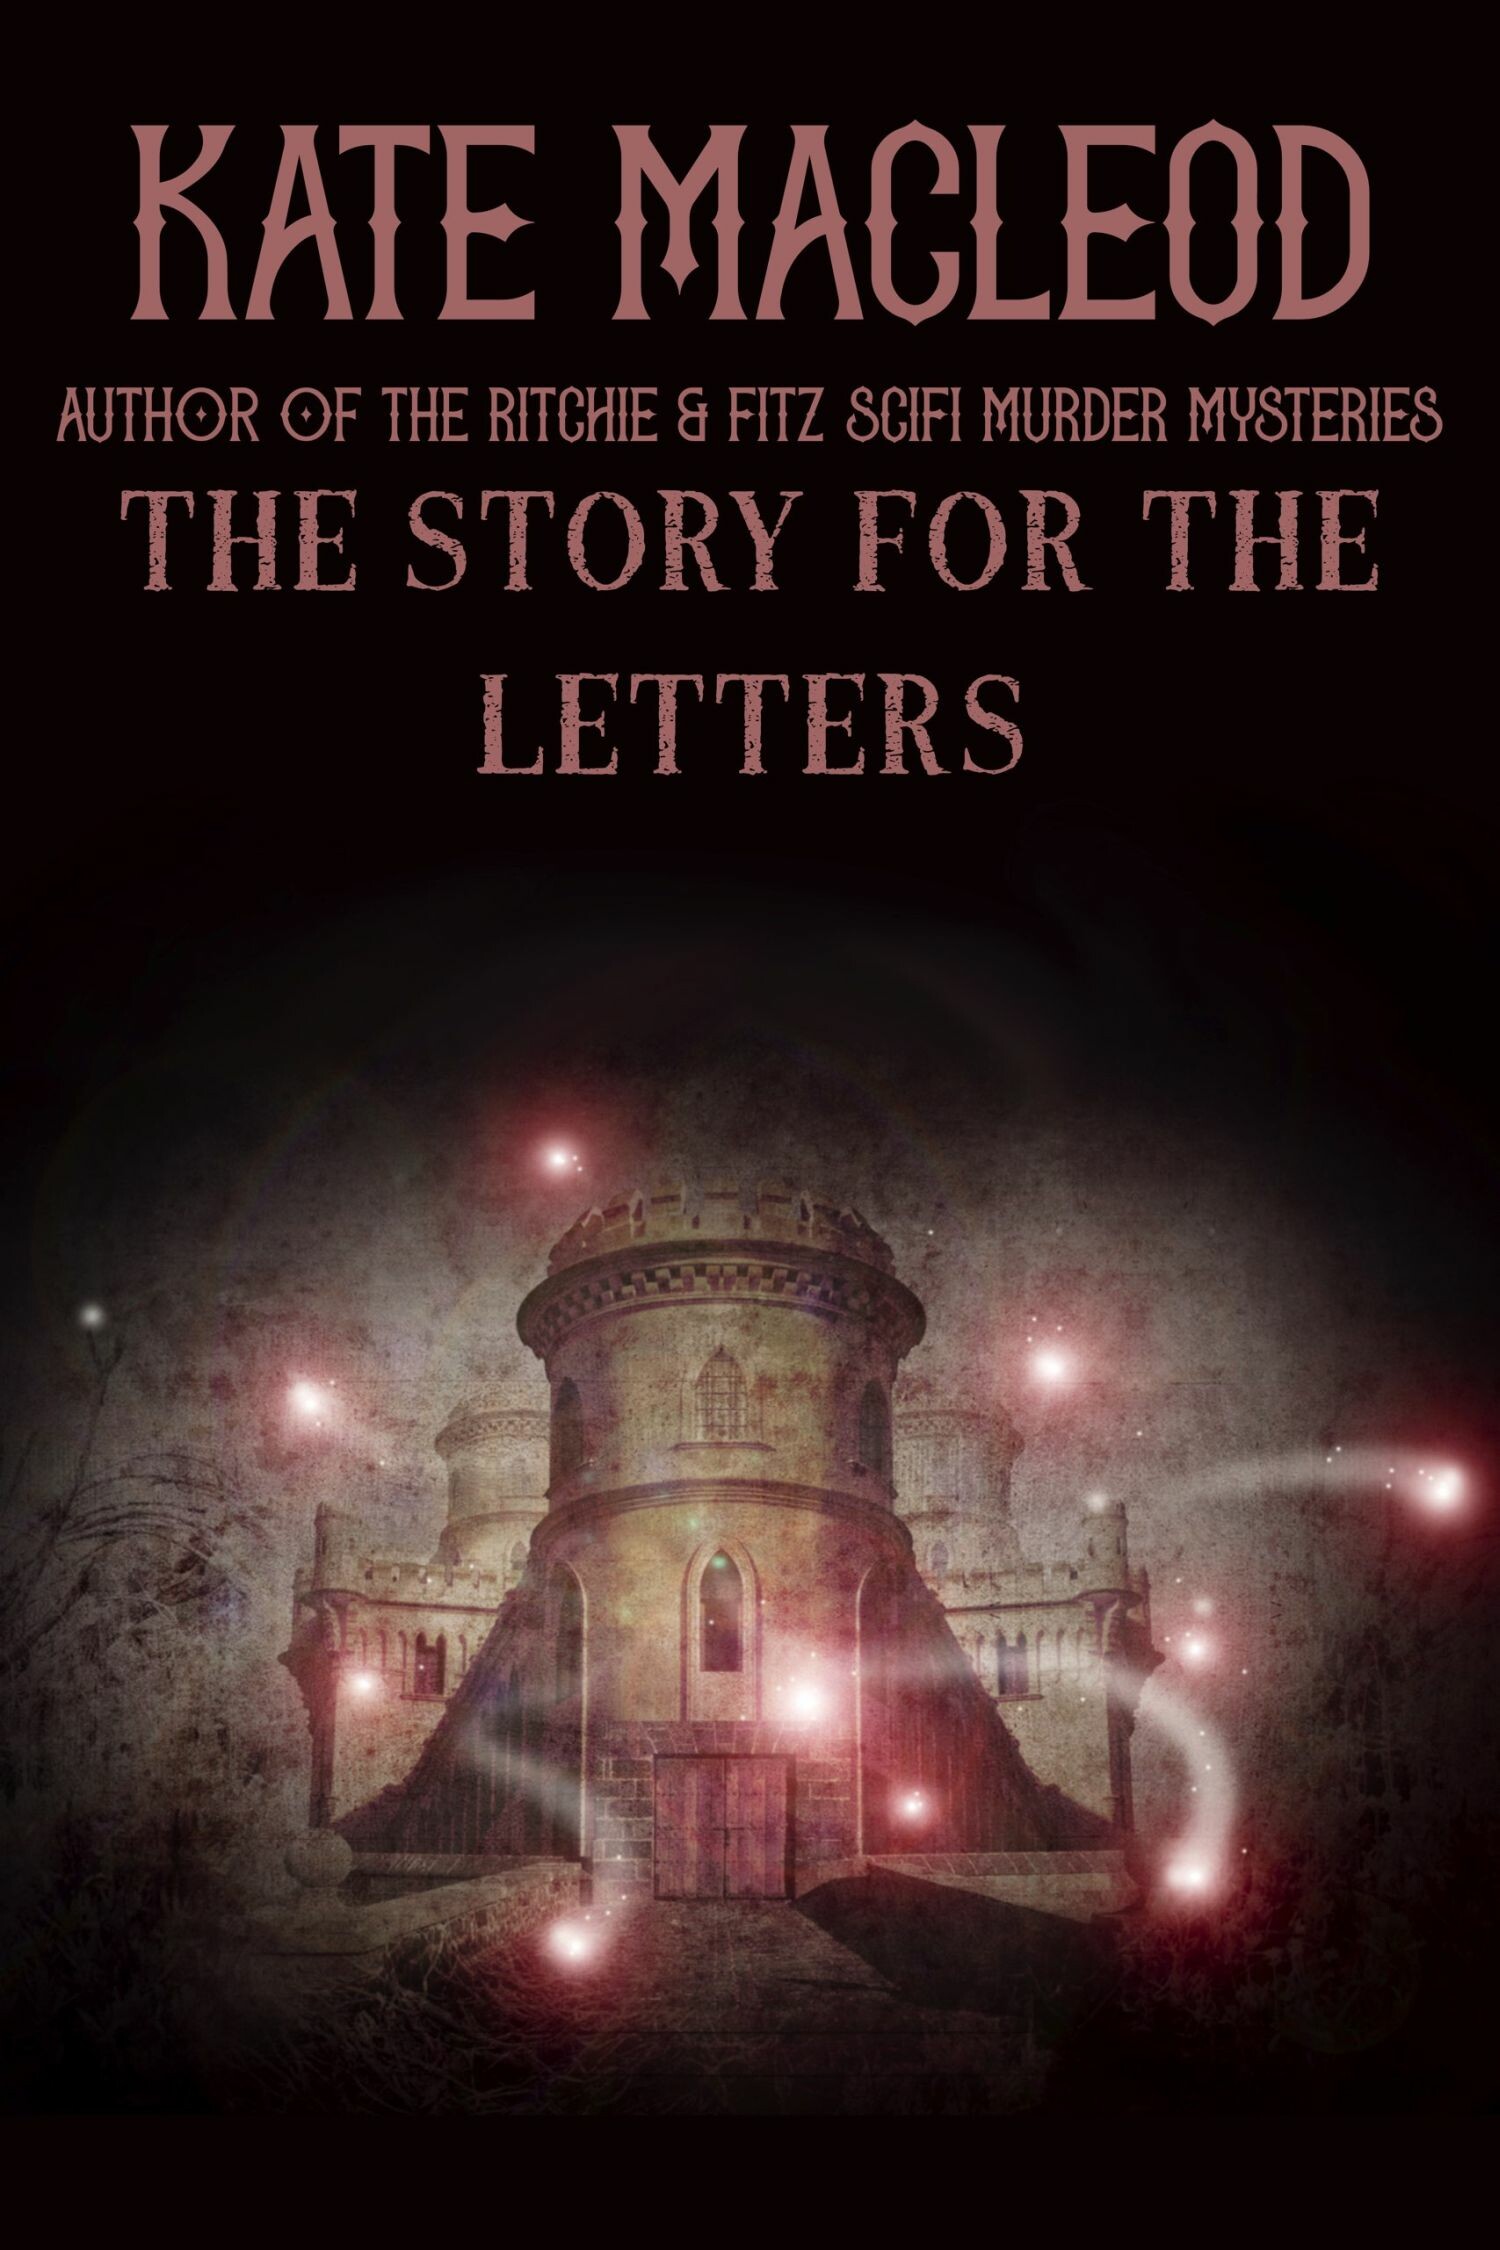 The Story for the Letters